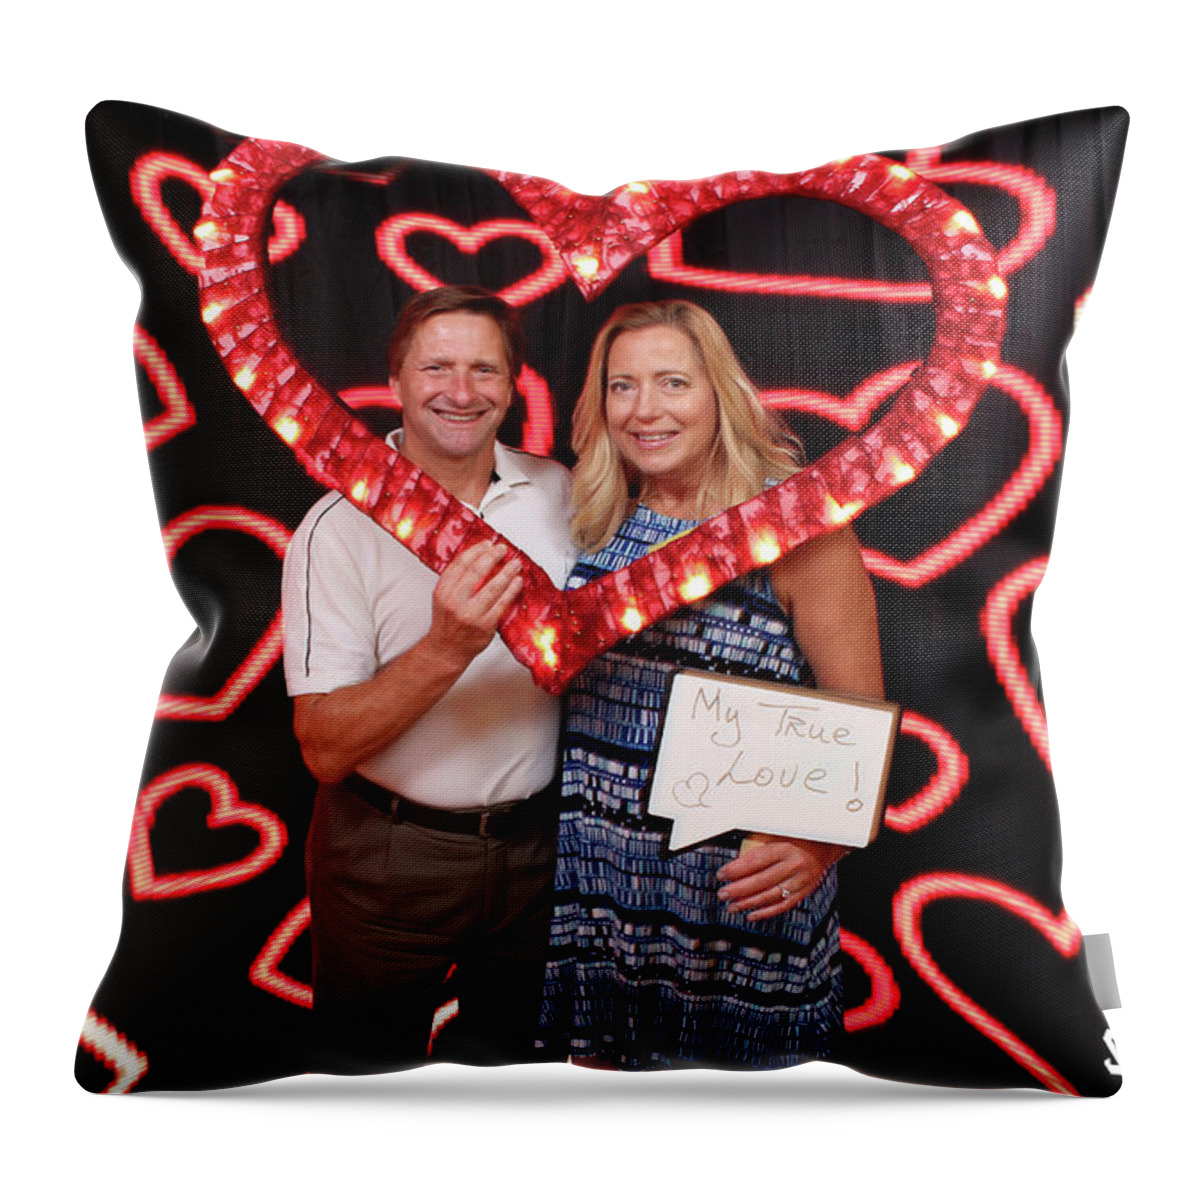  Throw Pillow featuring the photograph Lanier High School 40th Reunion #34 by Andrew Nourse